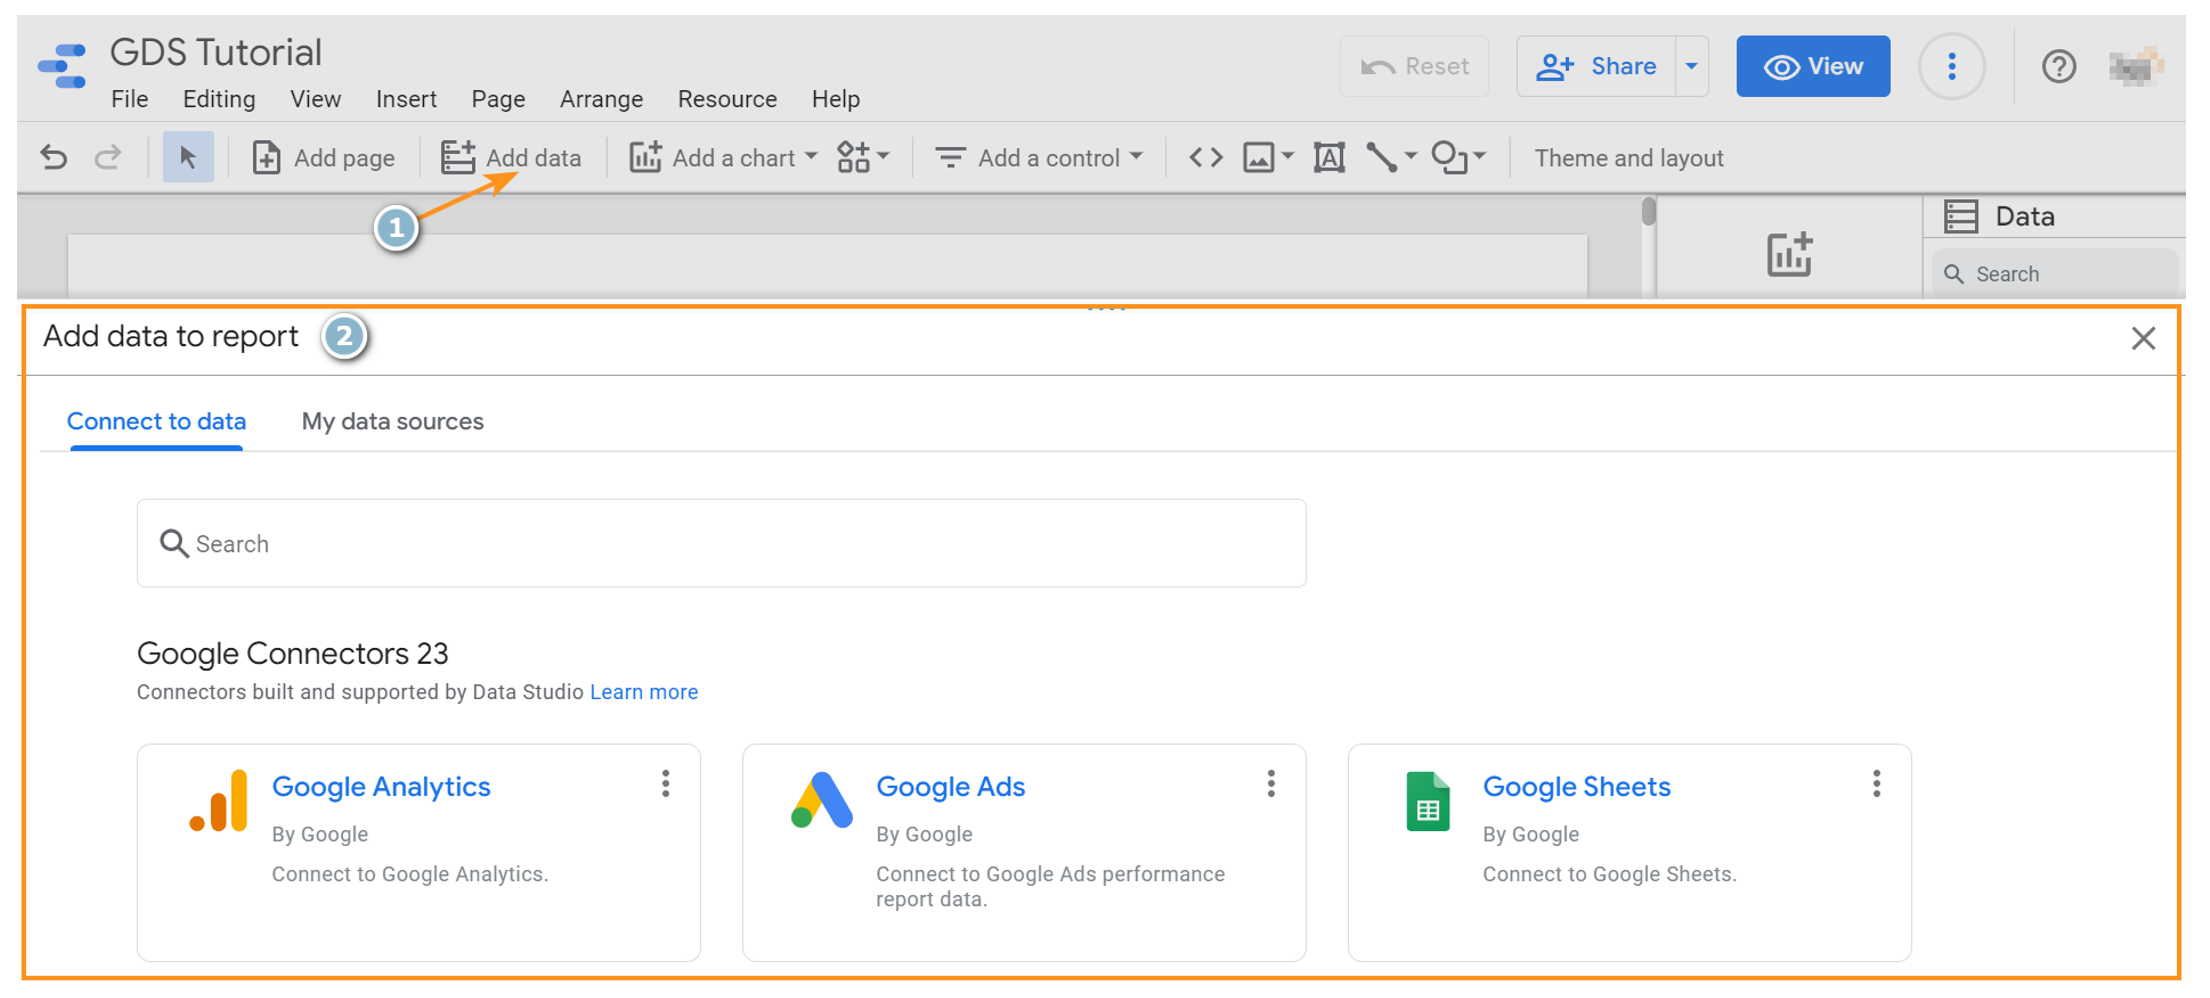 3. How to add a data source to your report on Google Data Studio